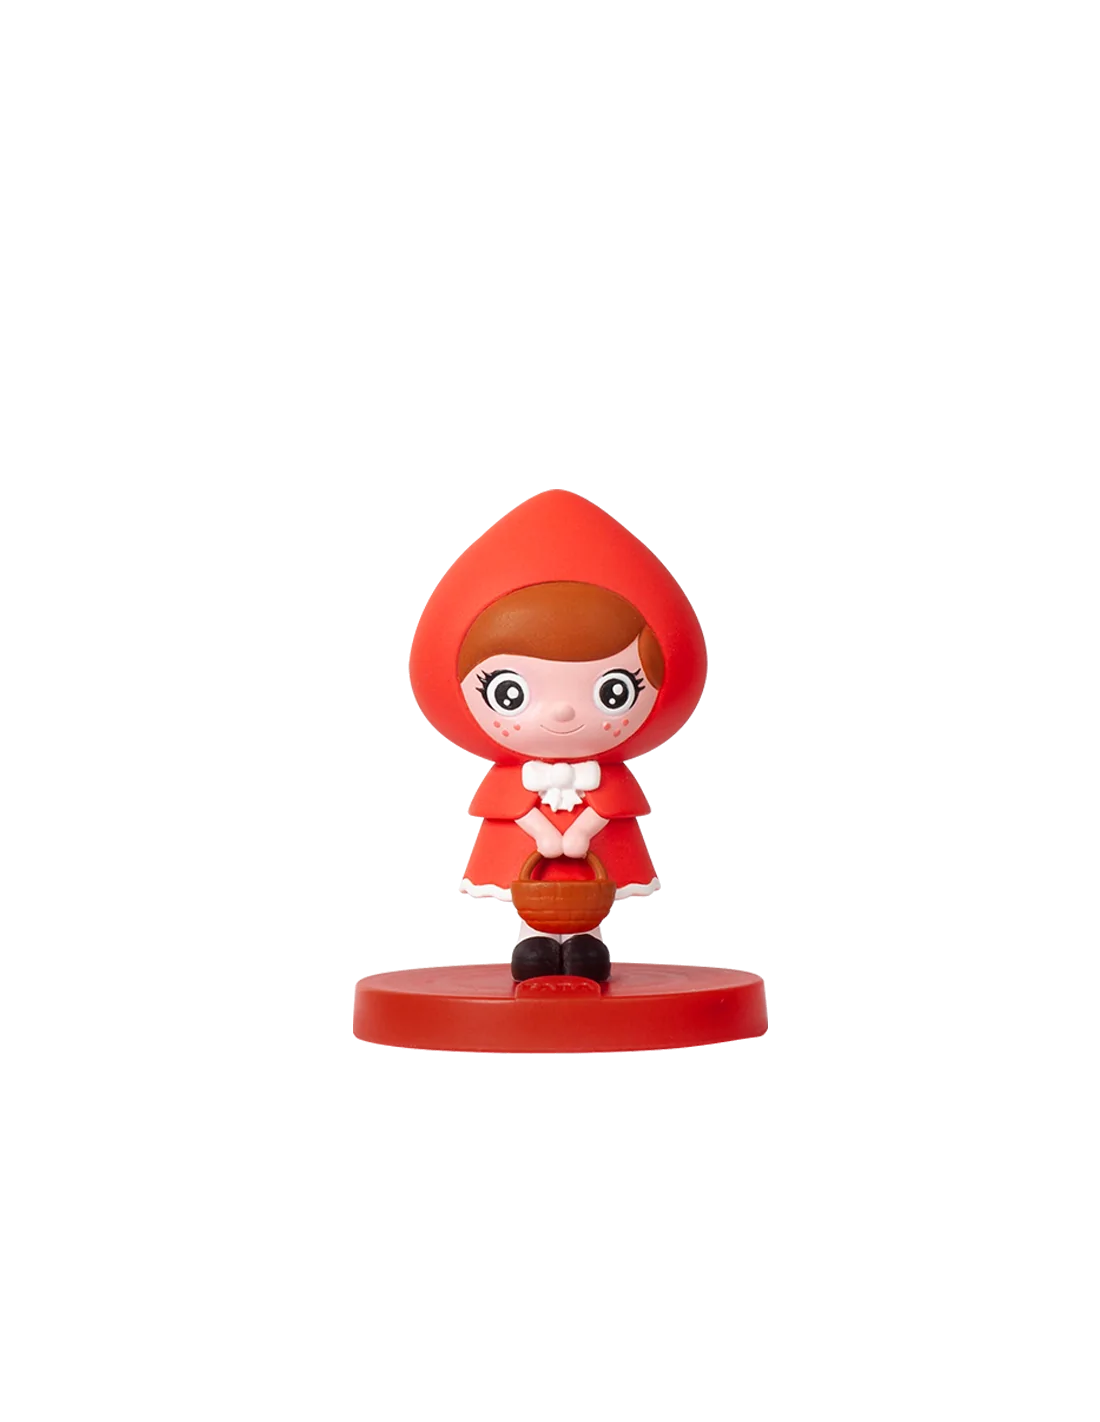 Faba Personnage Sonore: Le Petit Chaperon Rouge au Maroc - Baby And Mom